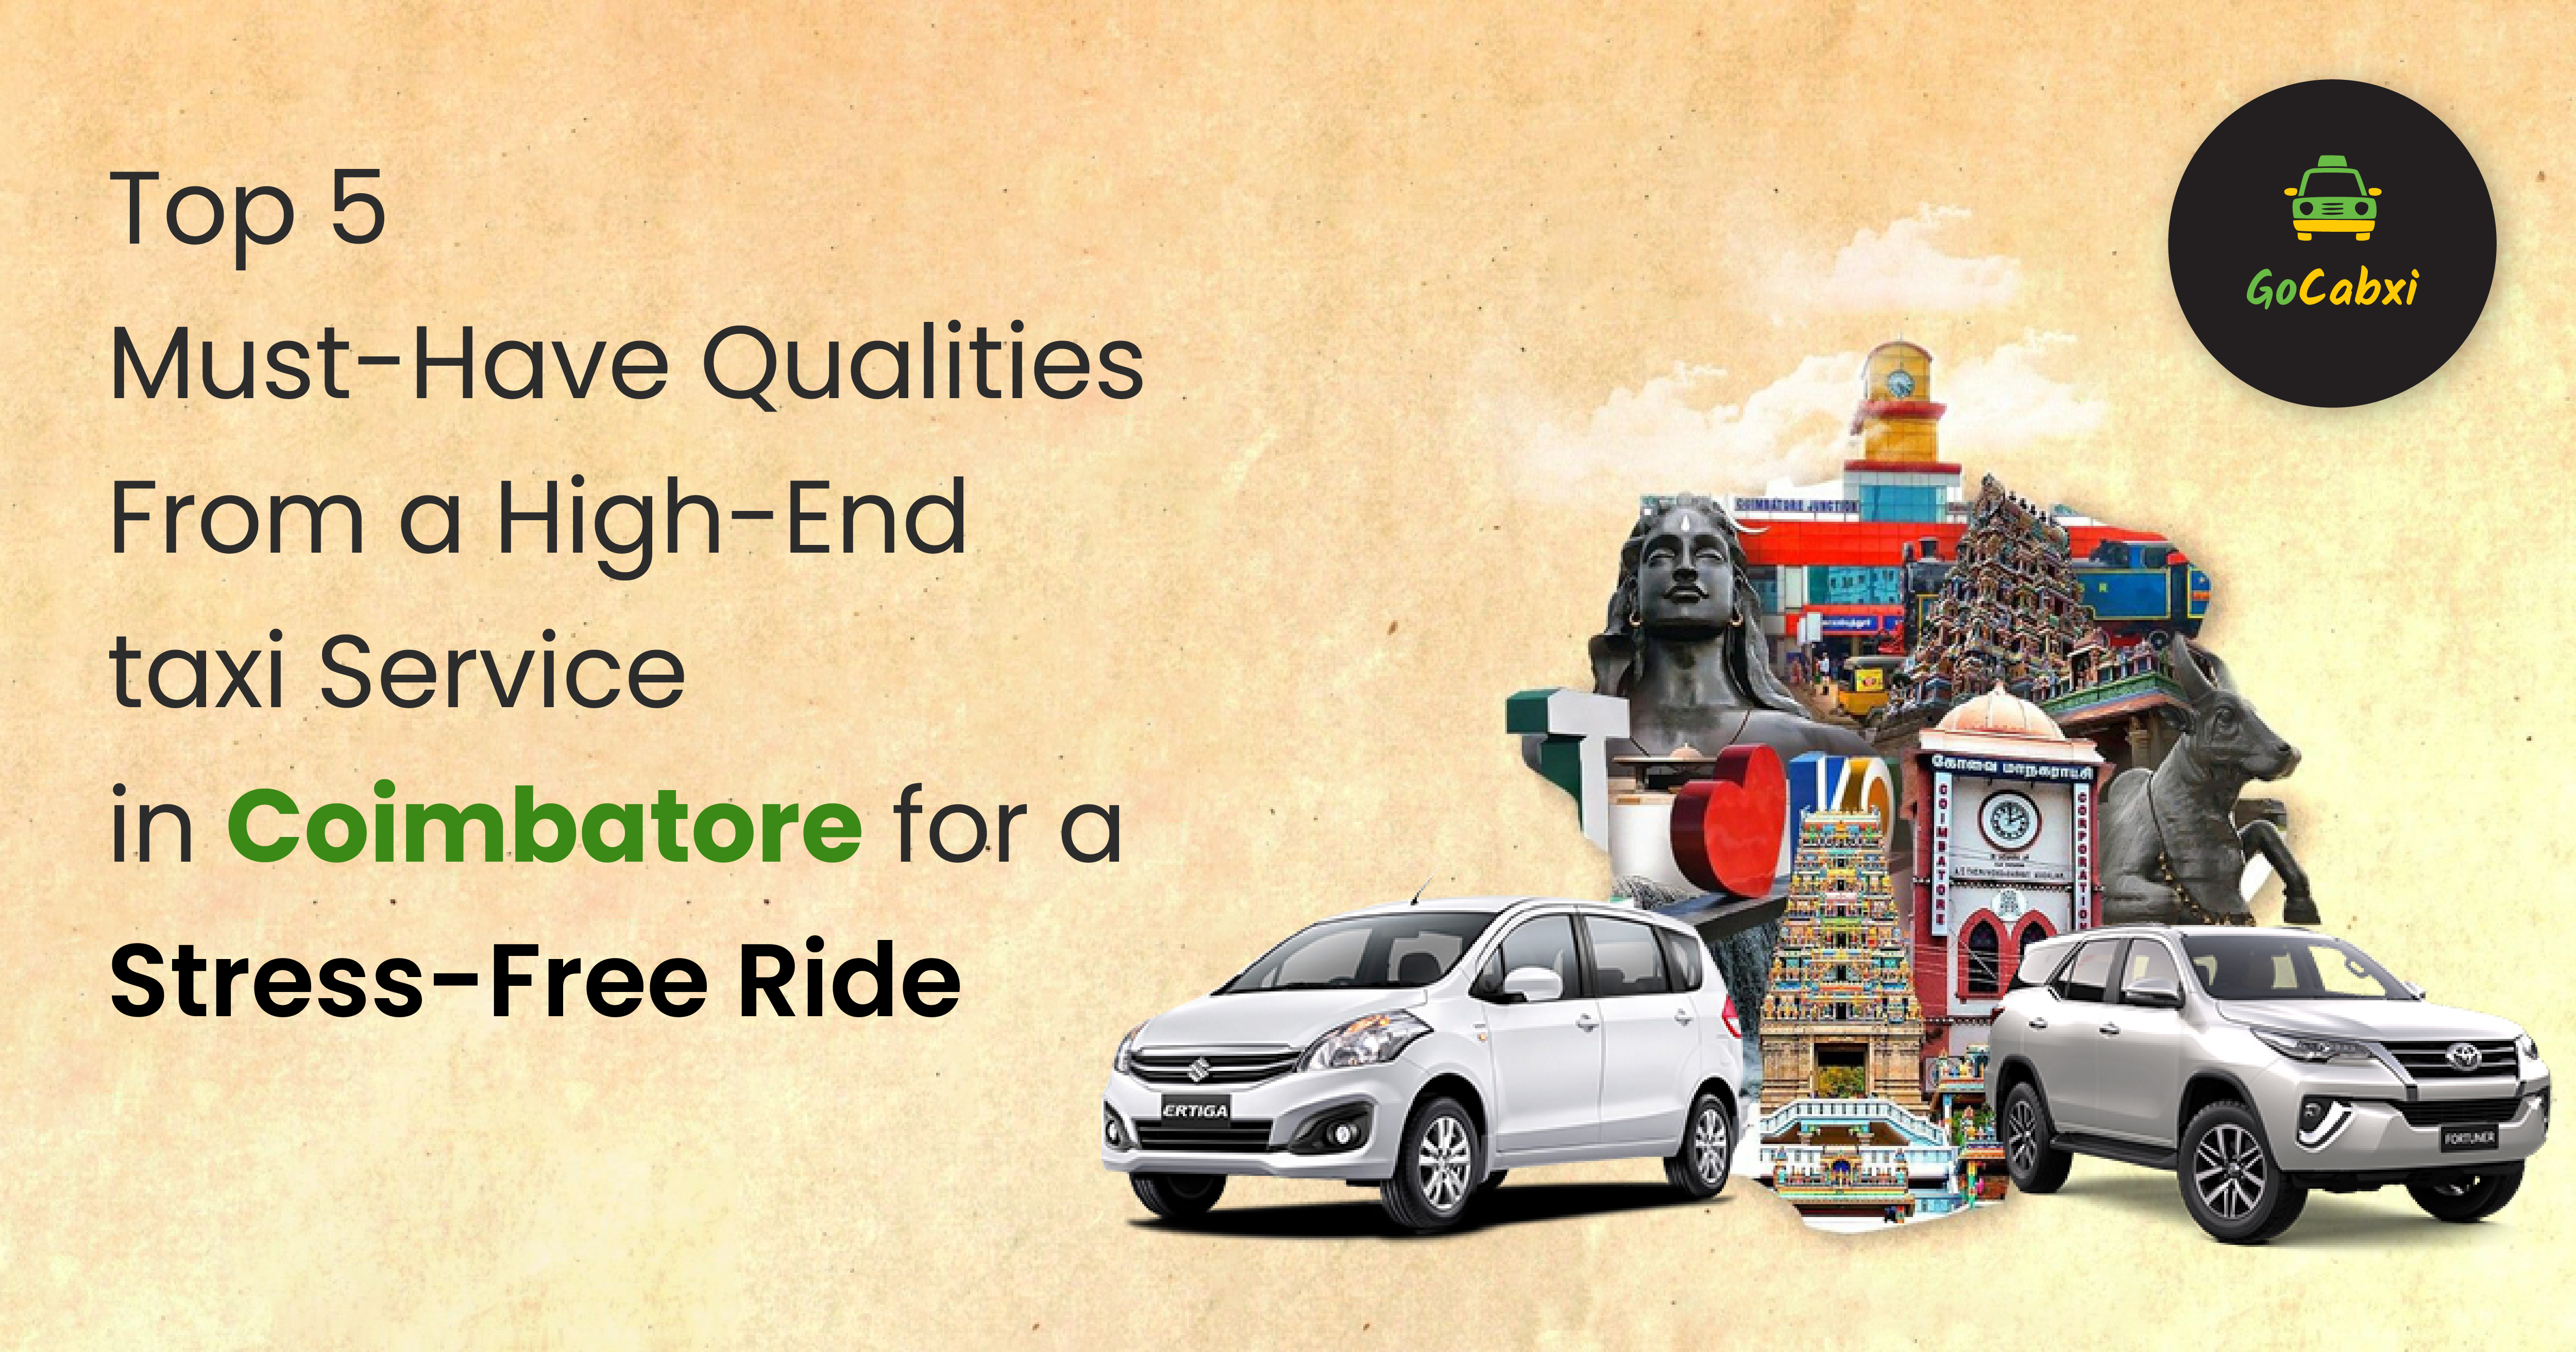 Top 5 Must-Have Qualities From a High-End taxi Service in Coimbatore.